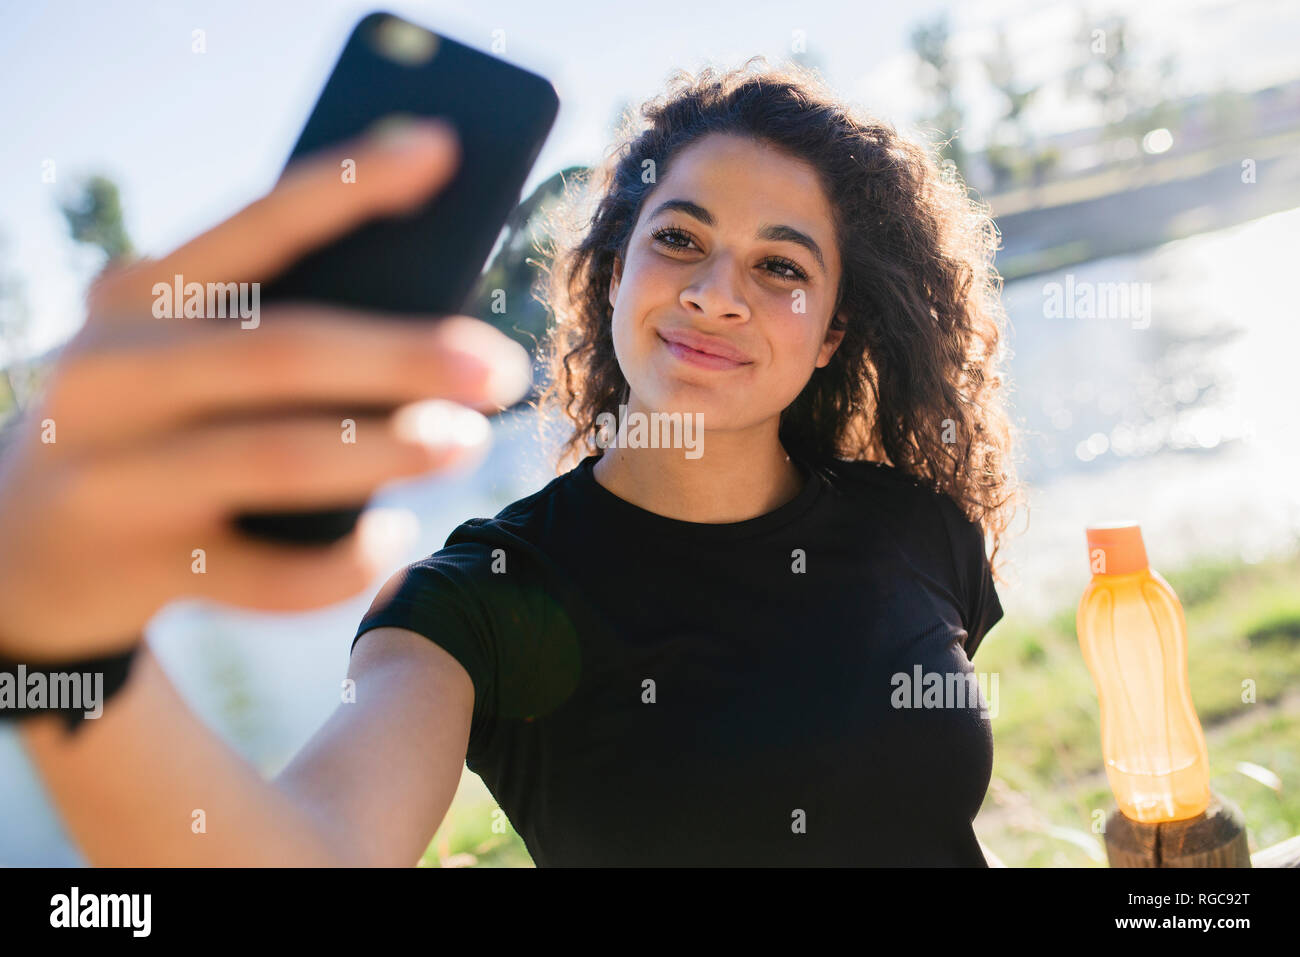 Sportive young woman taking a selfie at the riverside Stock Photo